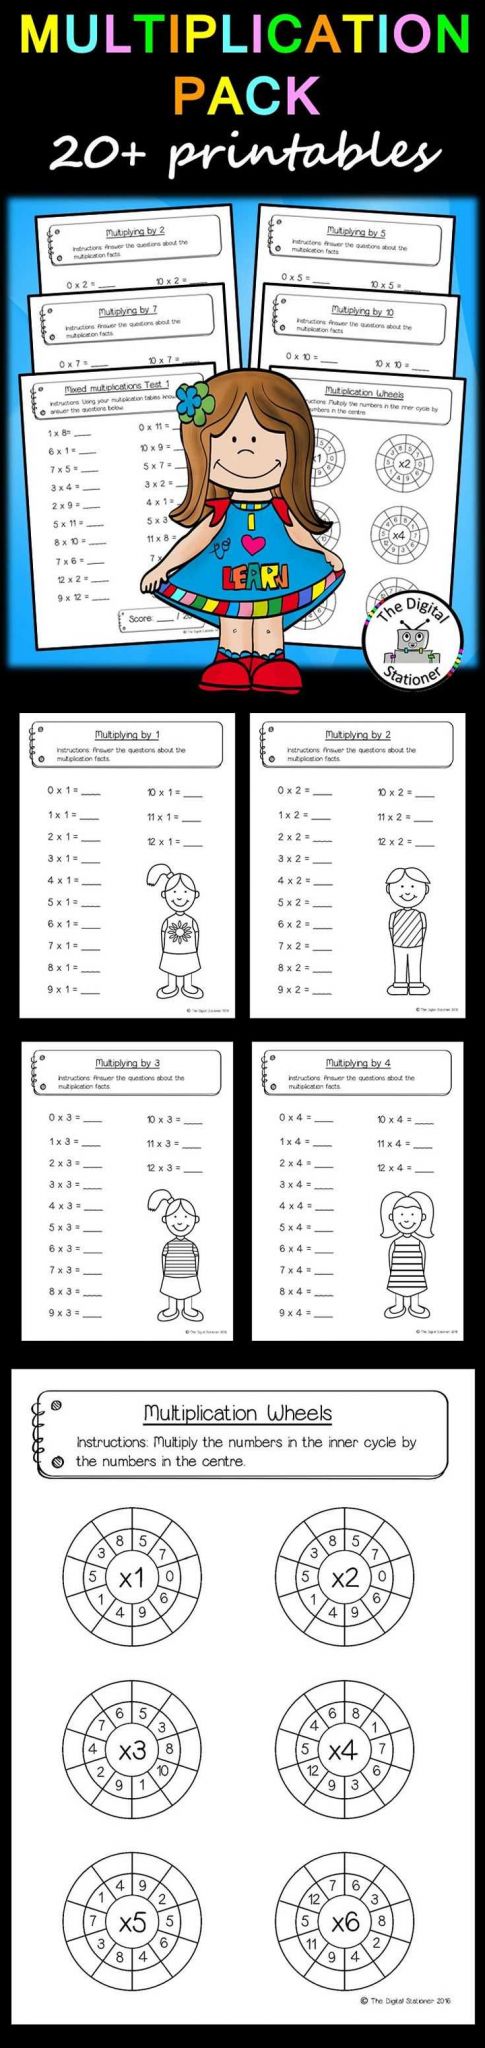 Poetic Devices Worksheet 5 and 10 Best My Tpt Classroom Displays Images On Pinterest